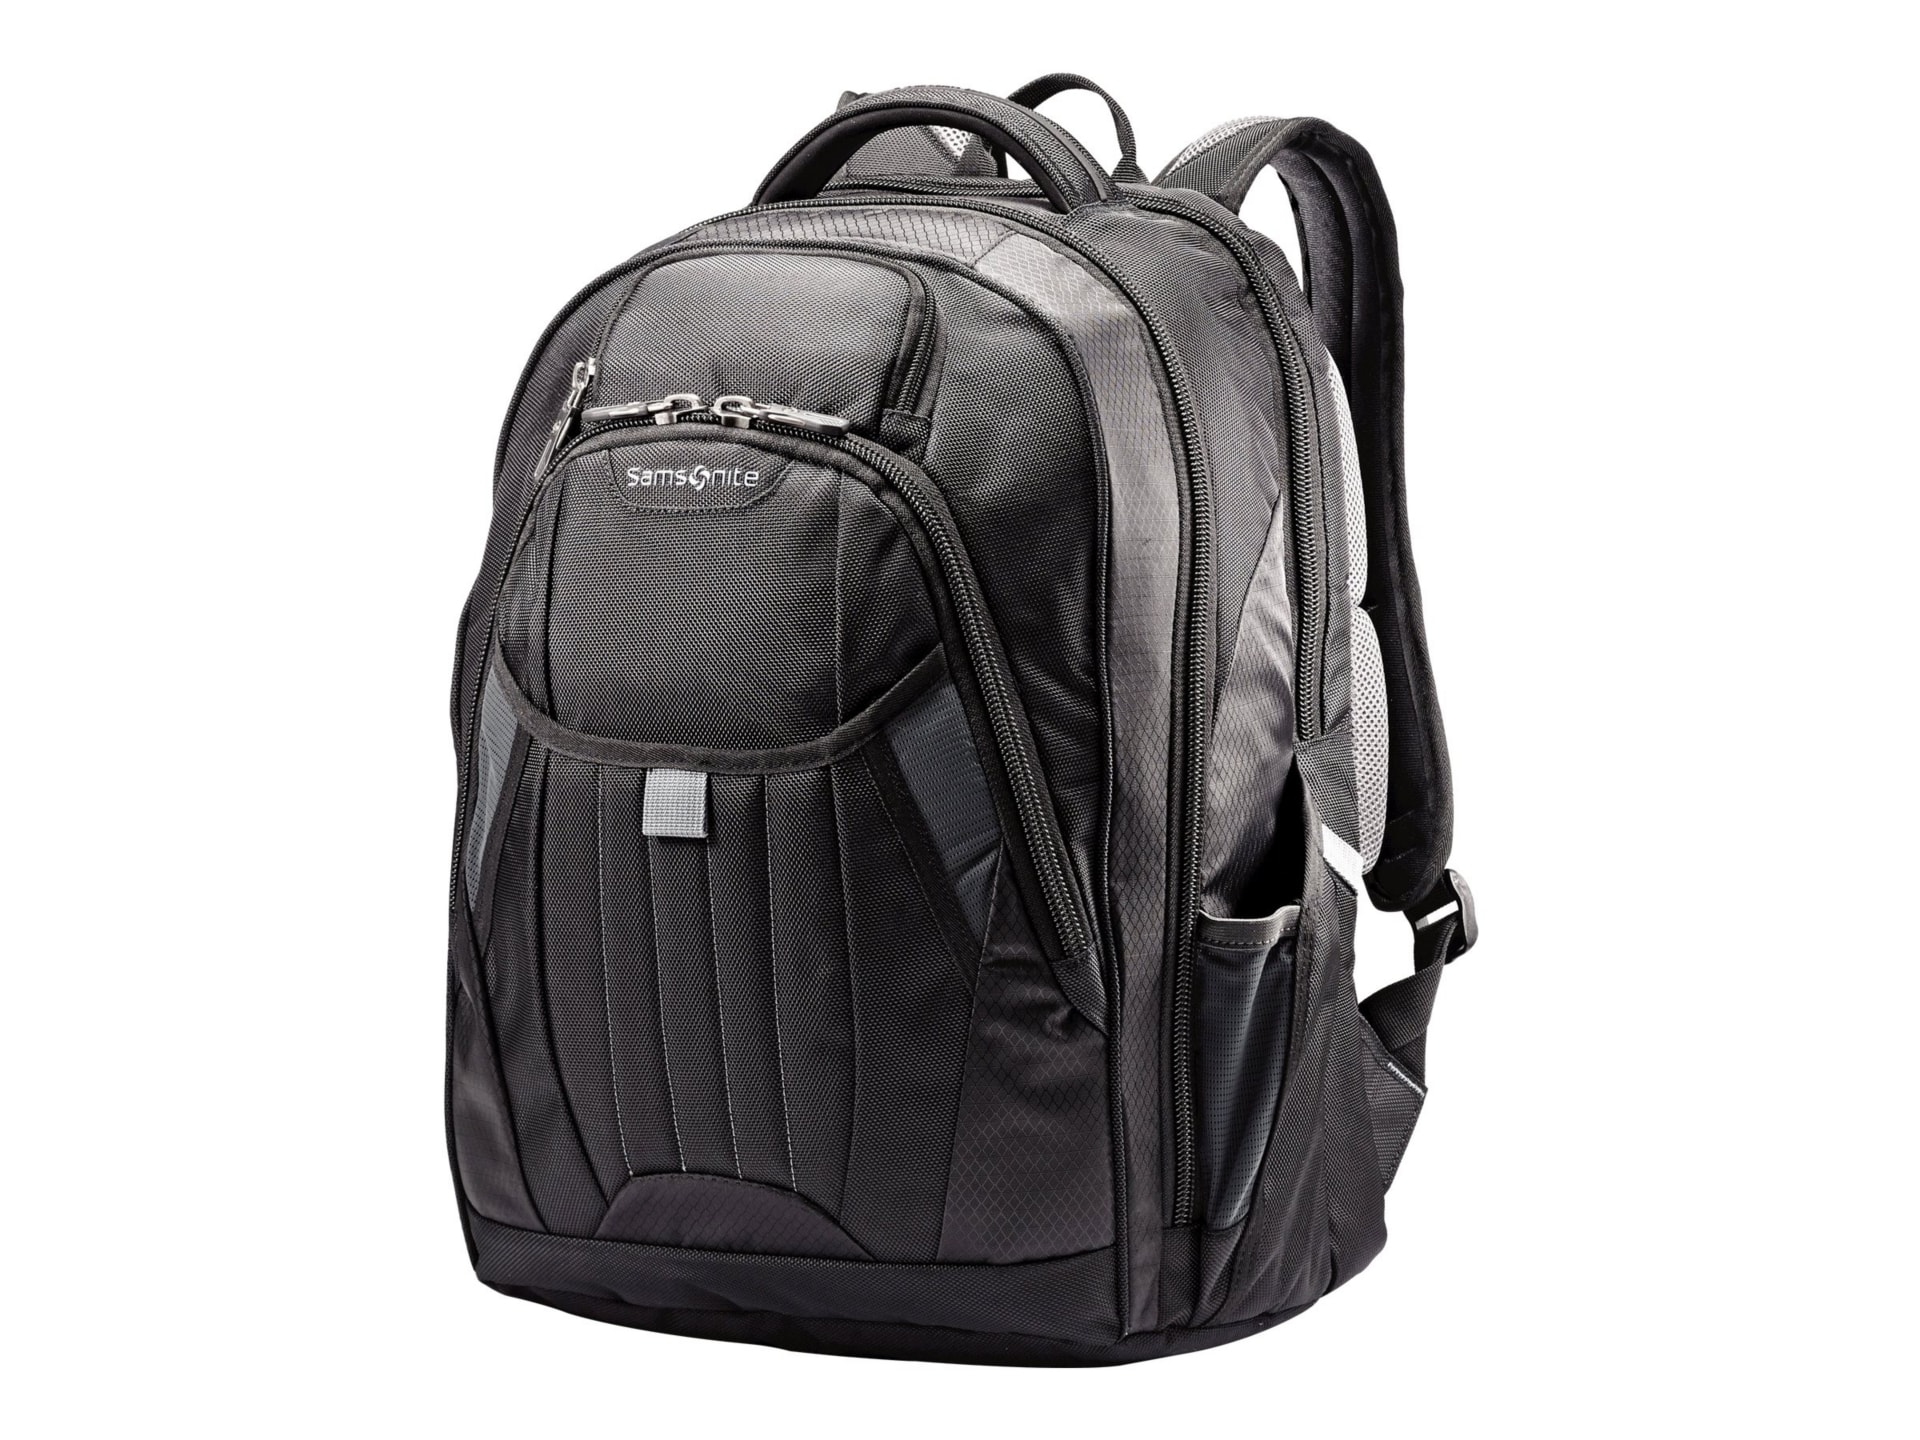 Fabrikant houding bungeejumpen Samsonite Tectonic 2 Large - notebook carrying backpack - 66303-1041 -  Backpacks - CDW.com